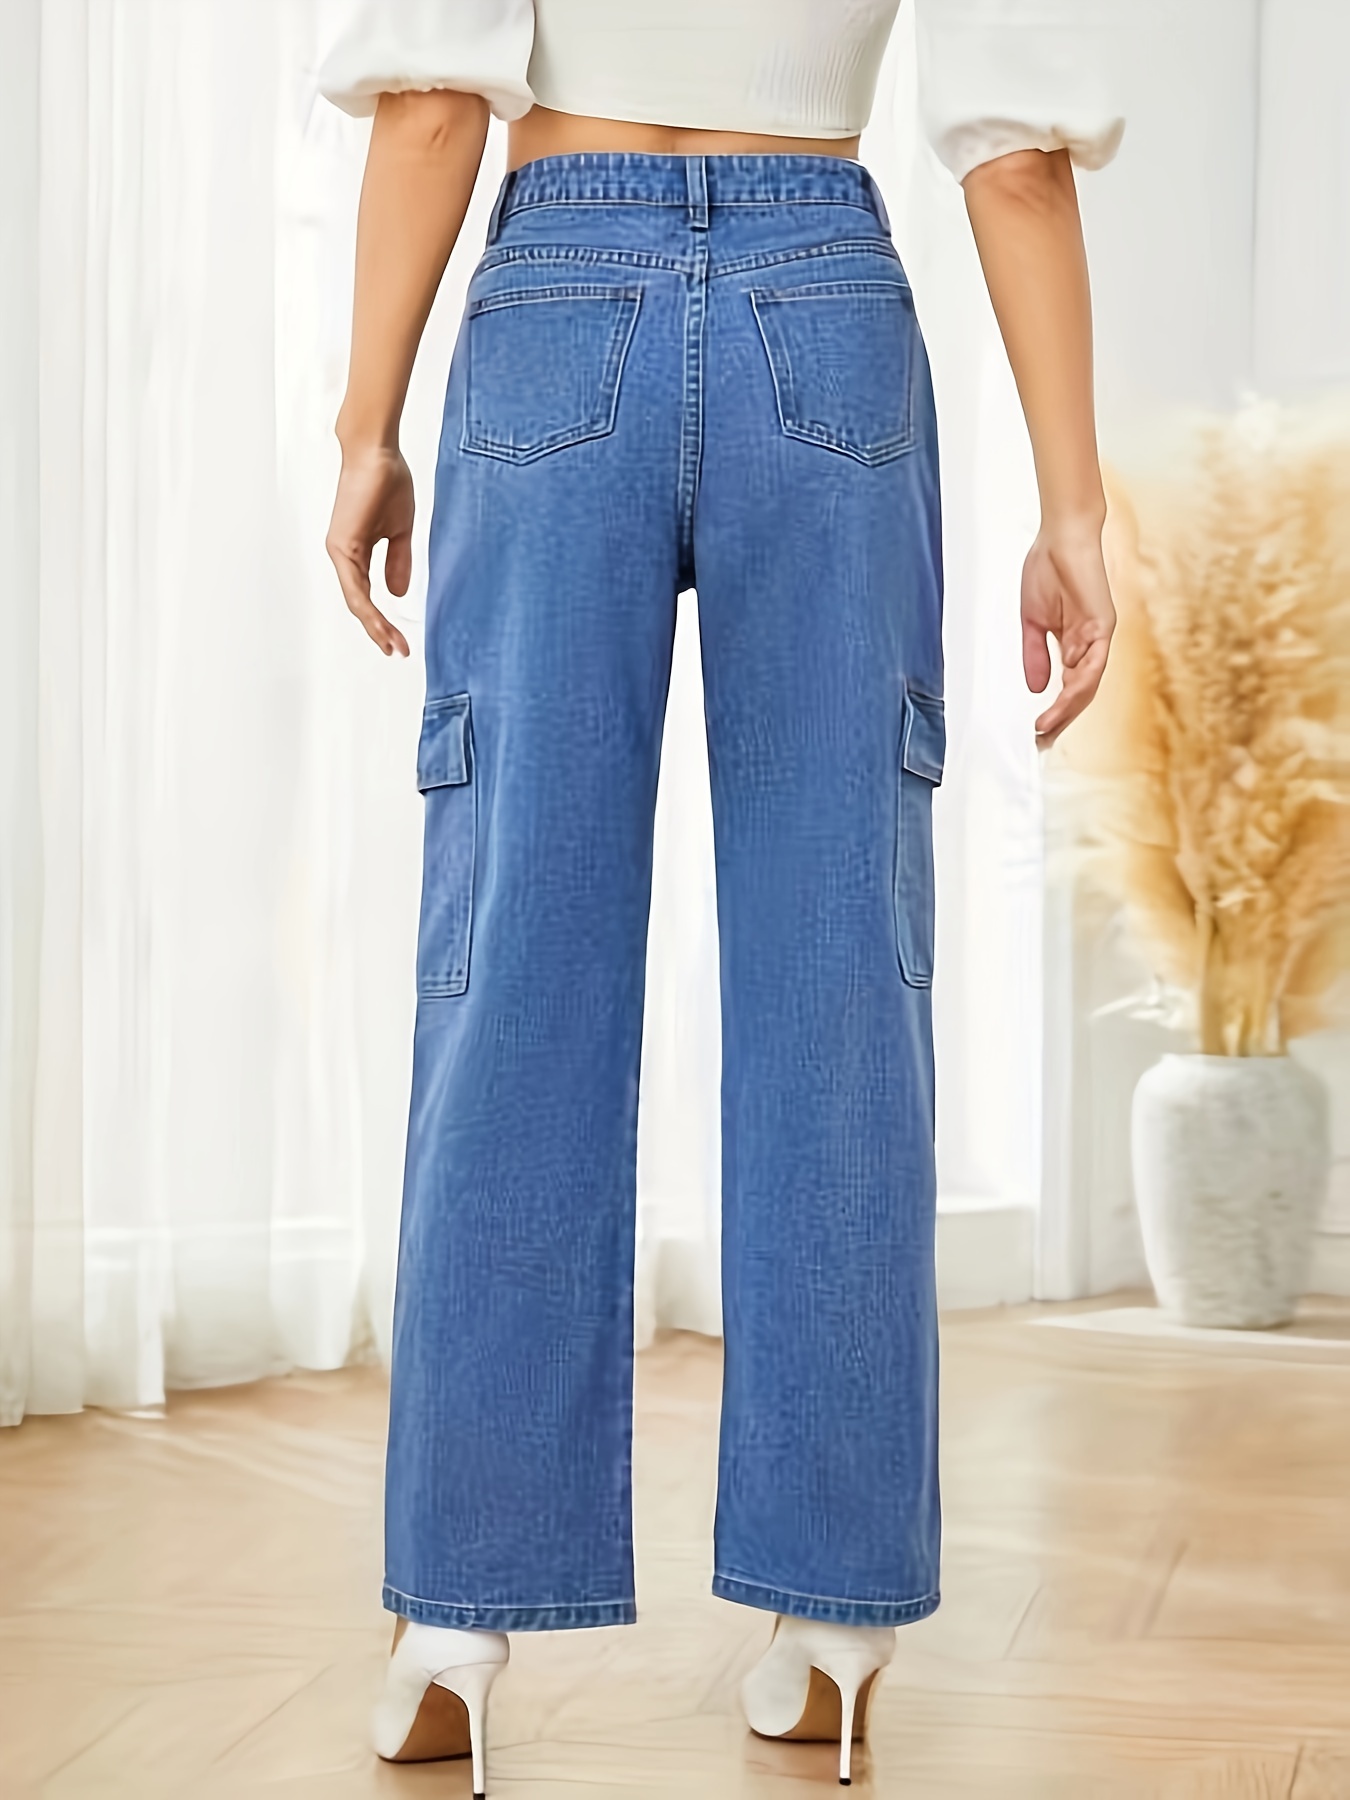 Blue Flap Pockets Cargo Pants, Loose Fit Non-Stretch Y2K & Kpop Style  Straight Jeans, Women's Denim Jeans & Clothing